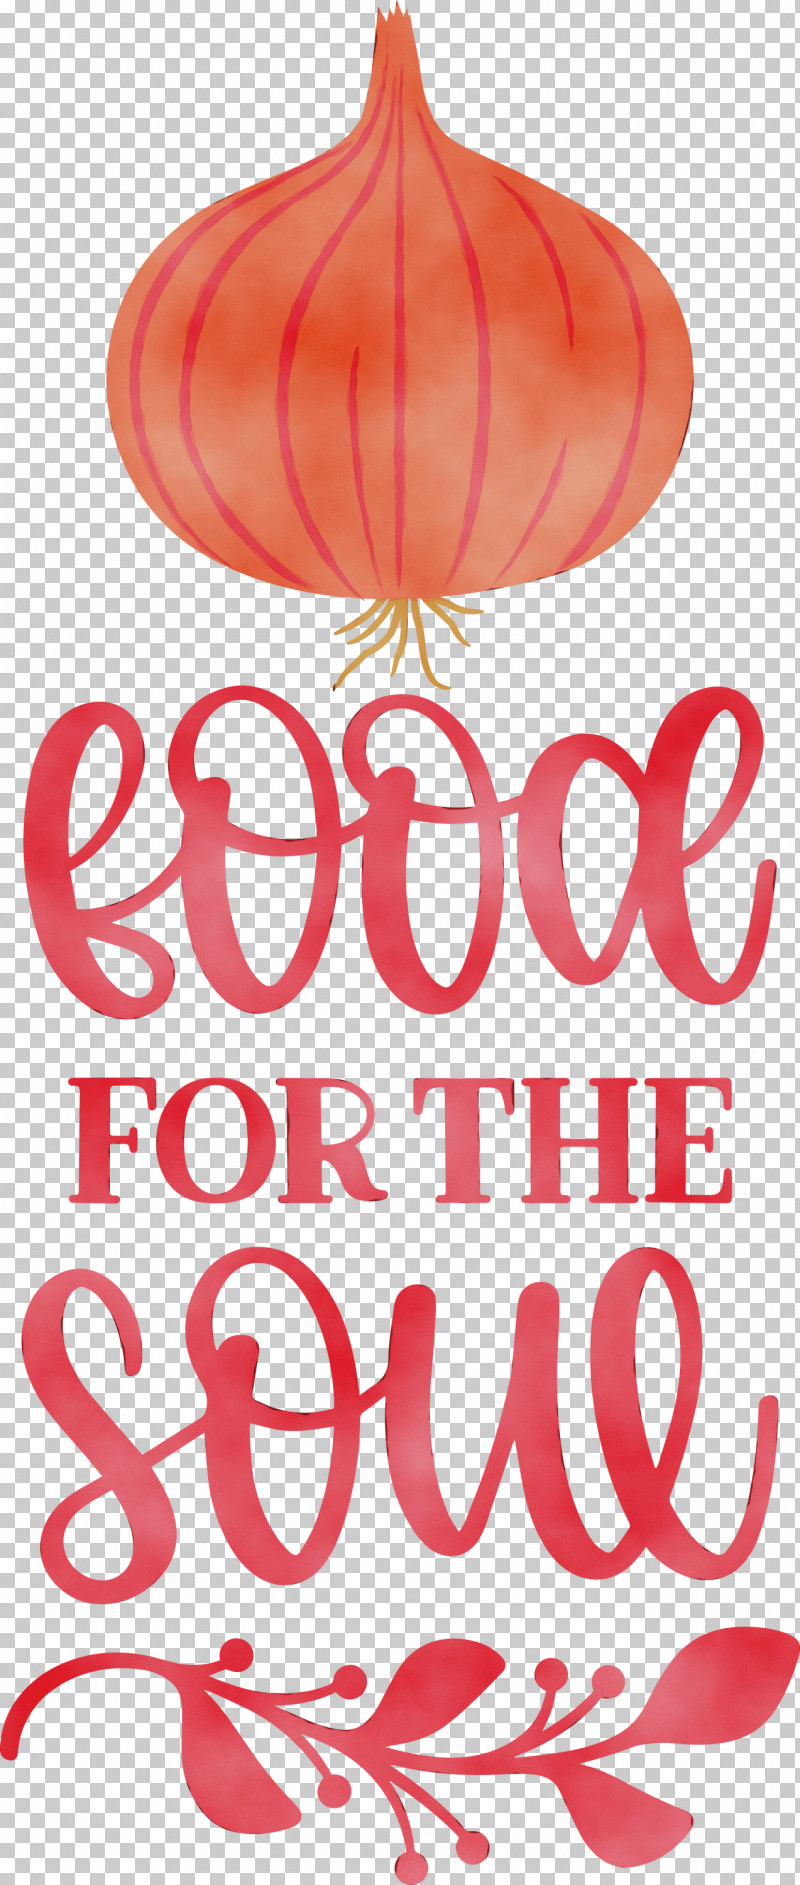 Royalty-free Pop Art PNG, Clipart, Cooking, Food, Paint, Pop Art, Royaltyfree Free PNG Download